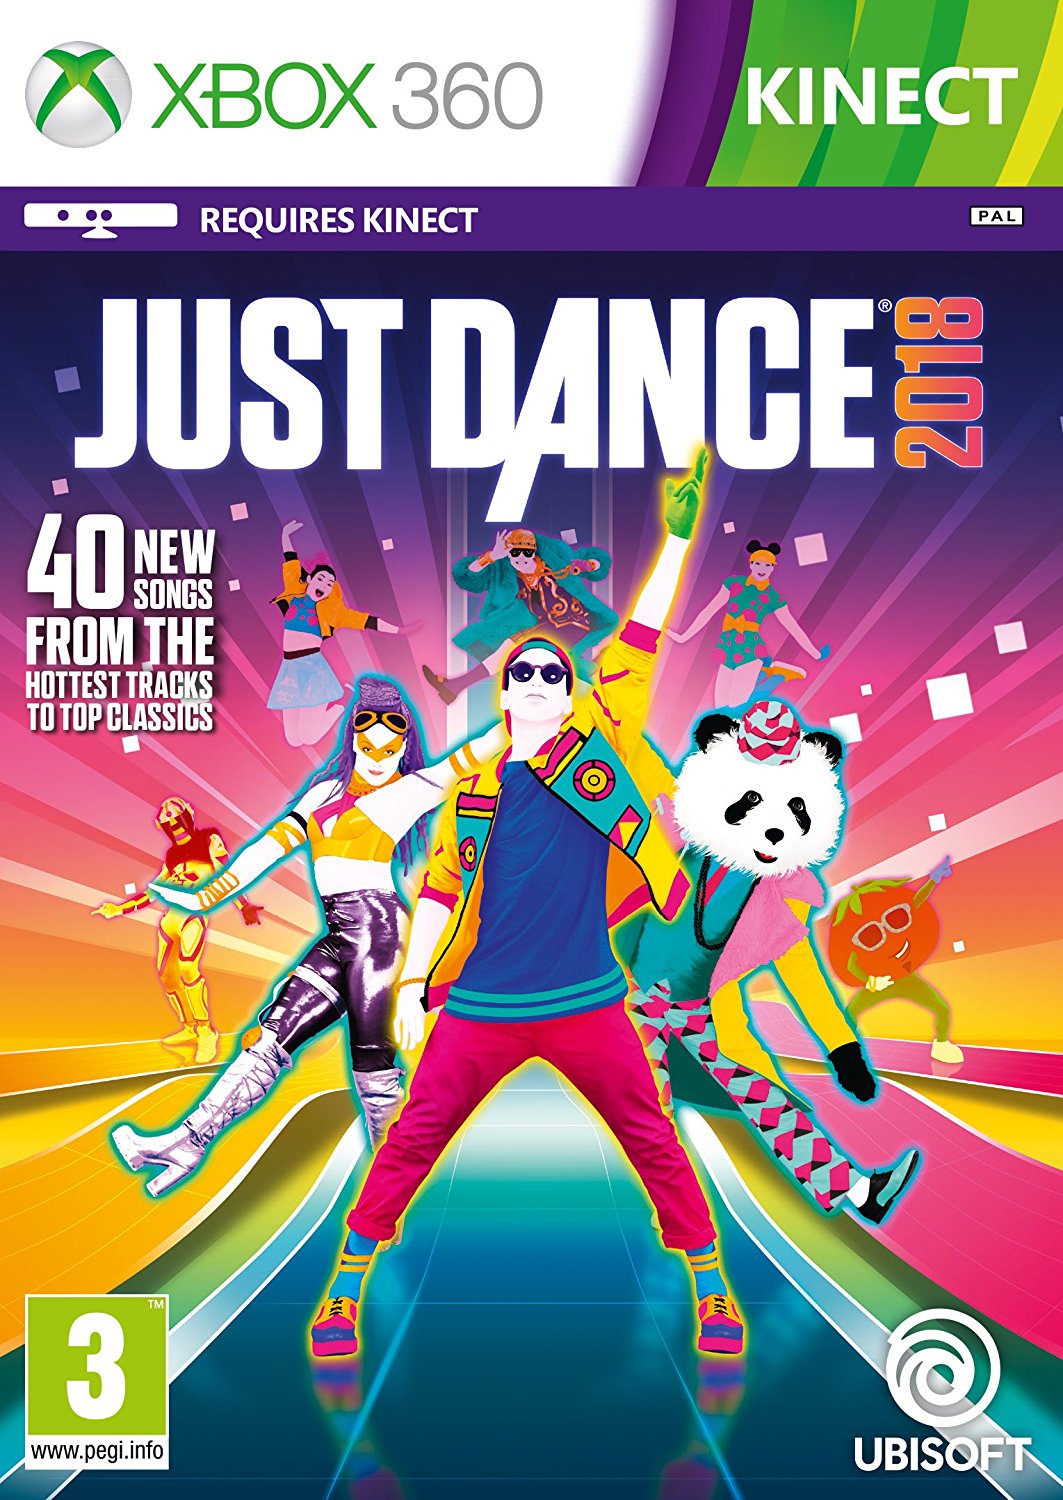 Just Dance 2018 - Xbox 360 title=Just Dance 2018 - Xbox 360